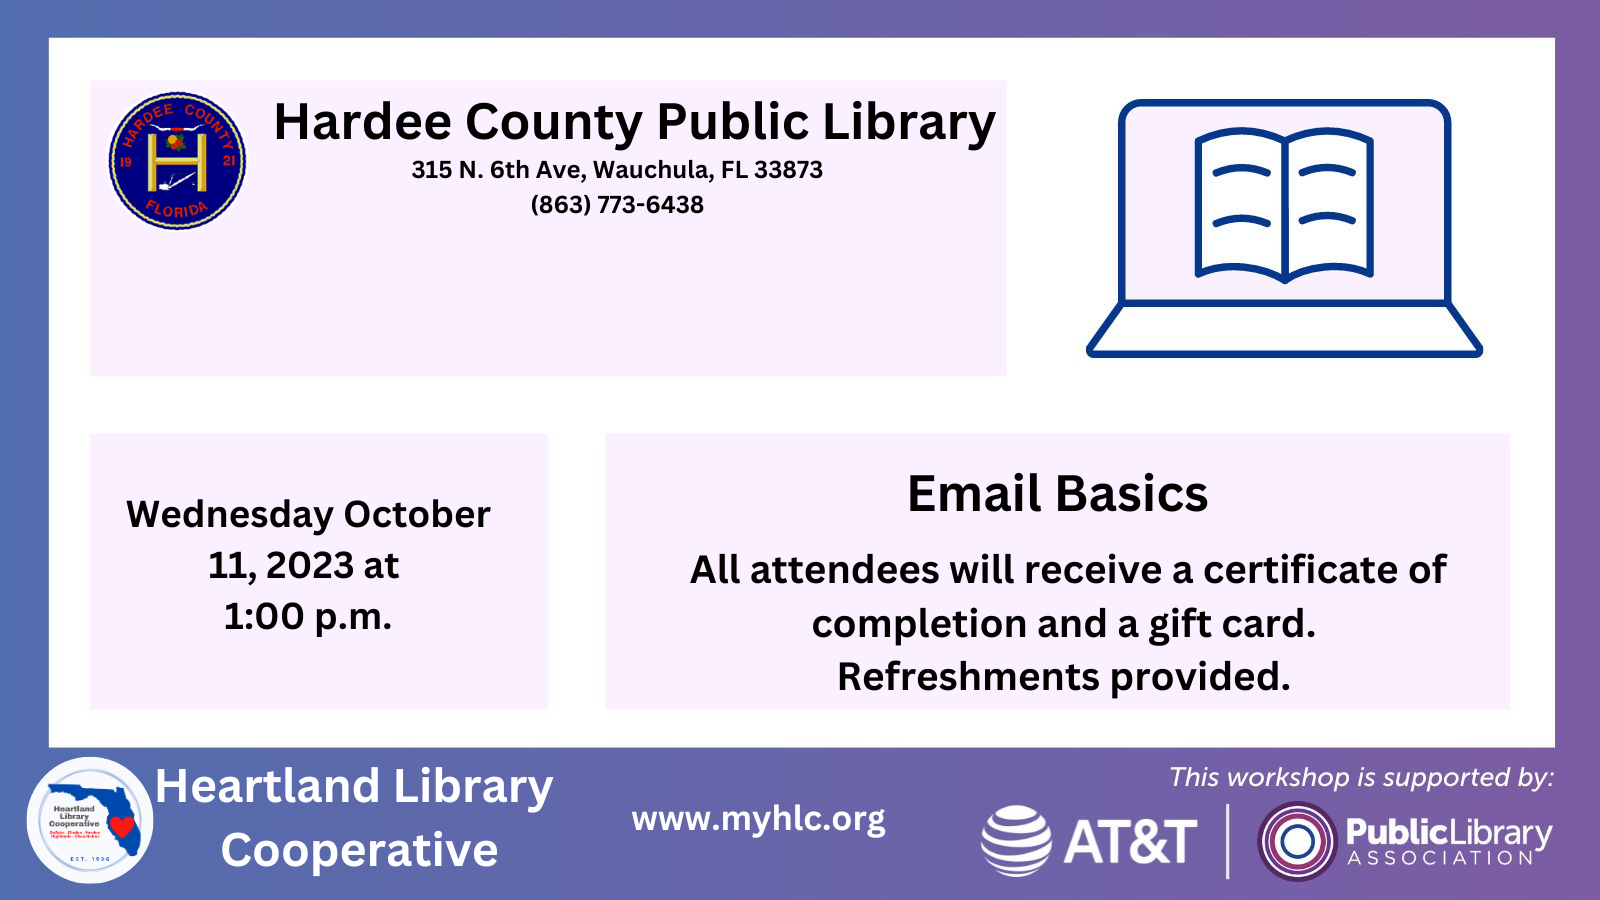 On Wednesday, October 11, 2023 at 10 a.m., the Hardee County Public Library will host an Email basics course.